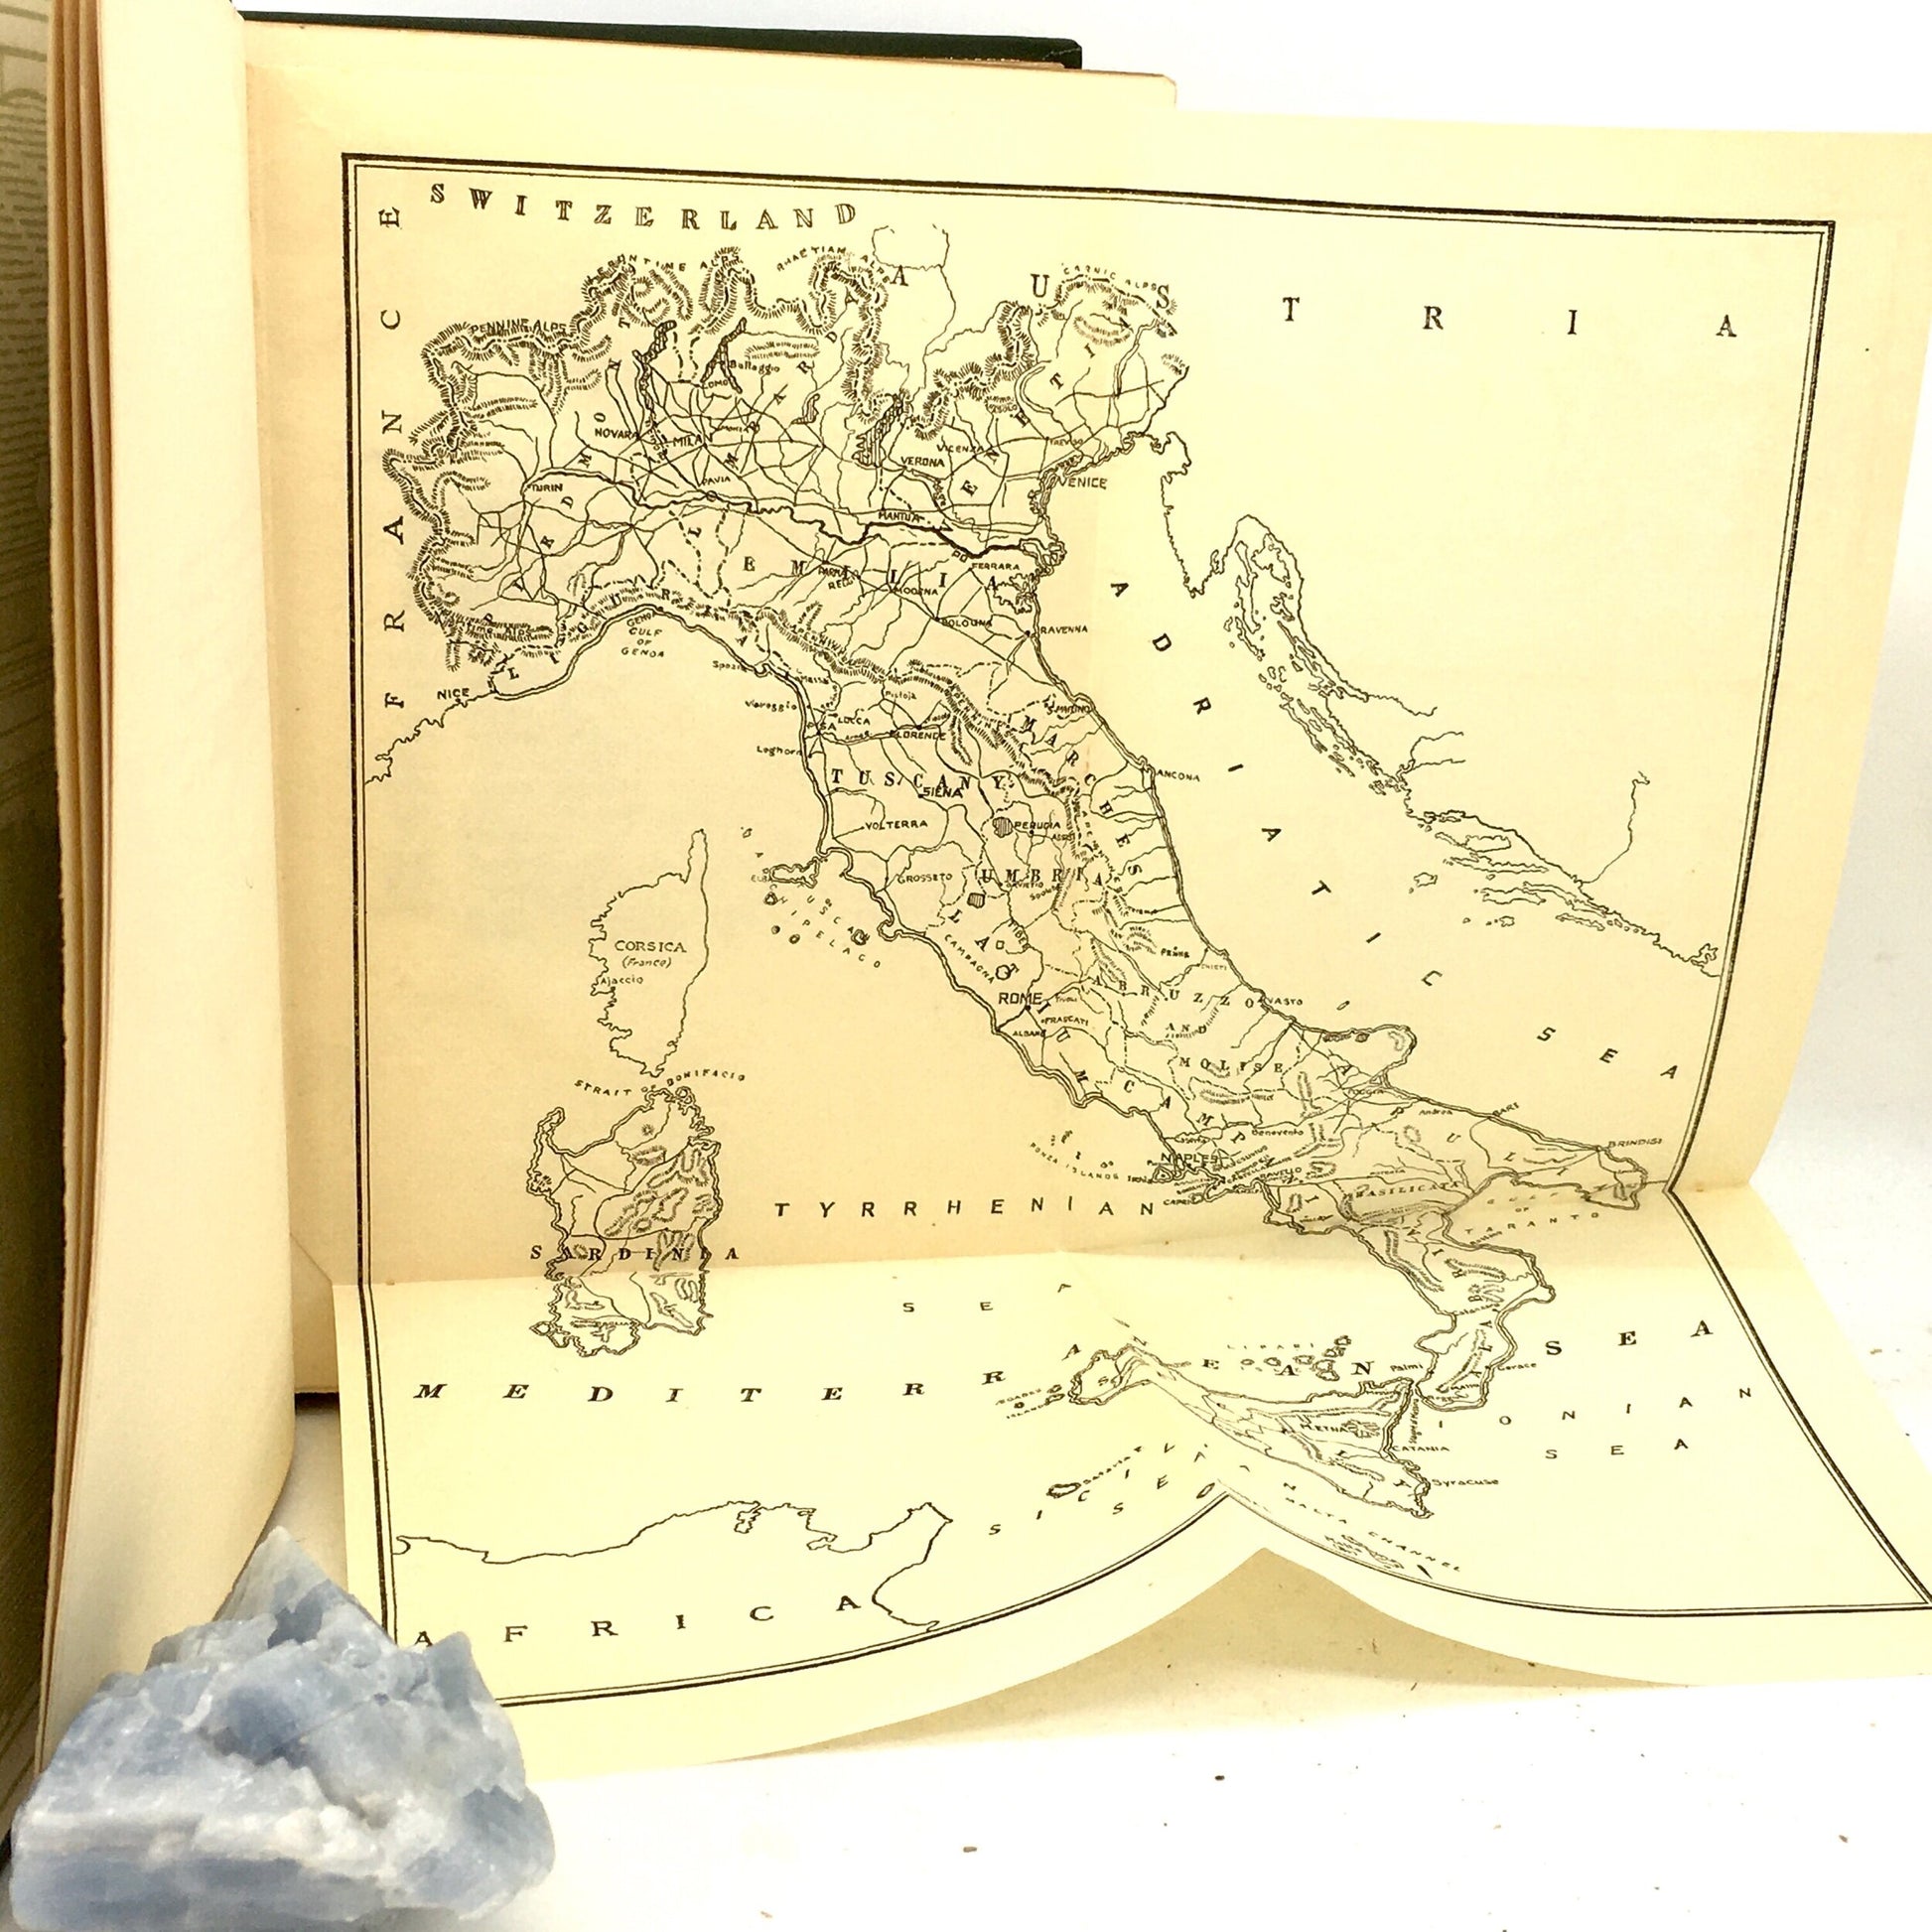 MASON, Caroline Atwater "The Spell of Italy" [LC Page, 1909] 1st Edition - Buzz Bookstore